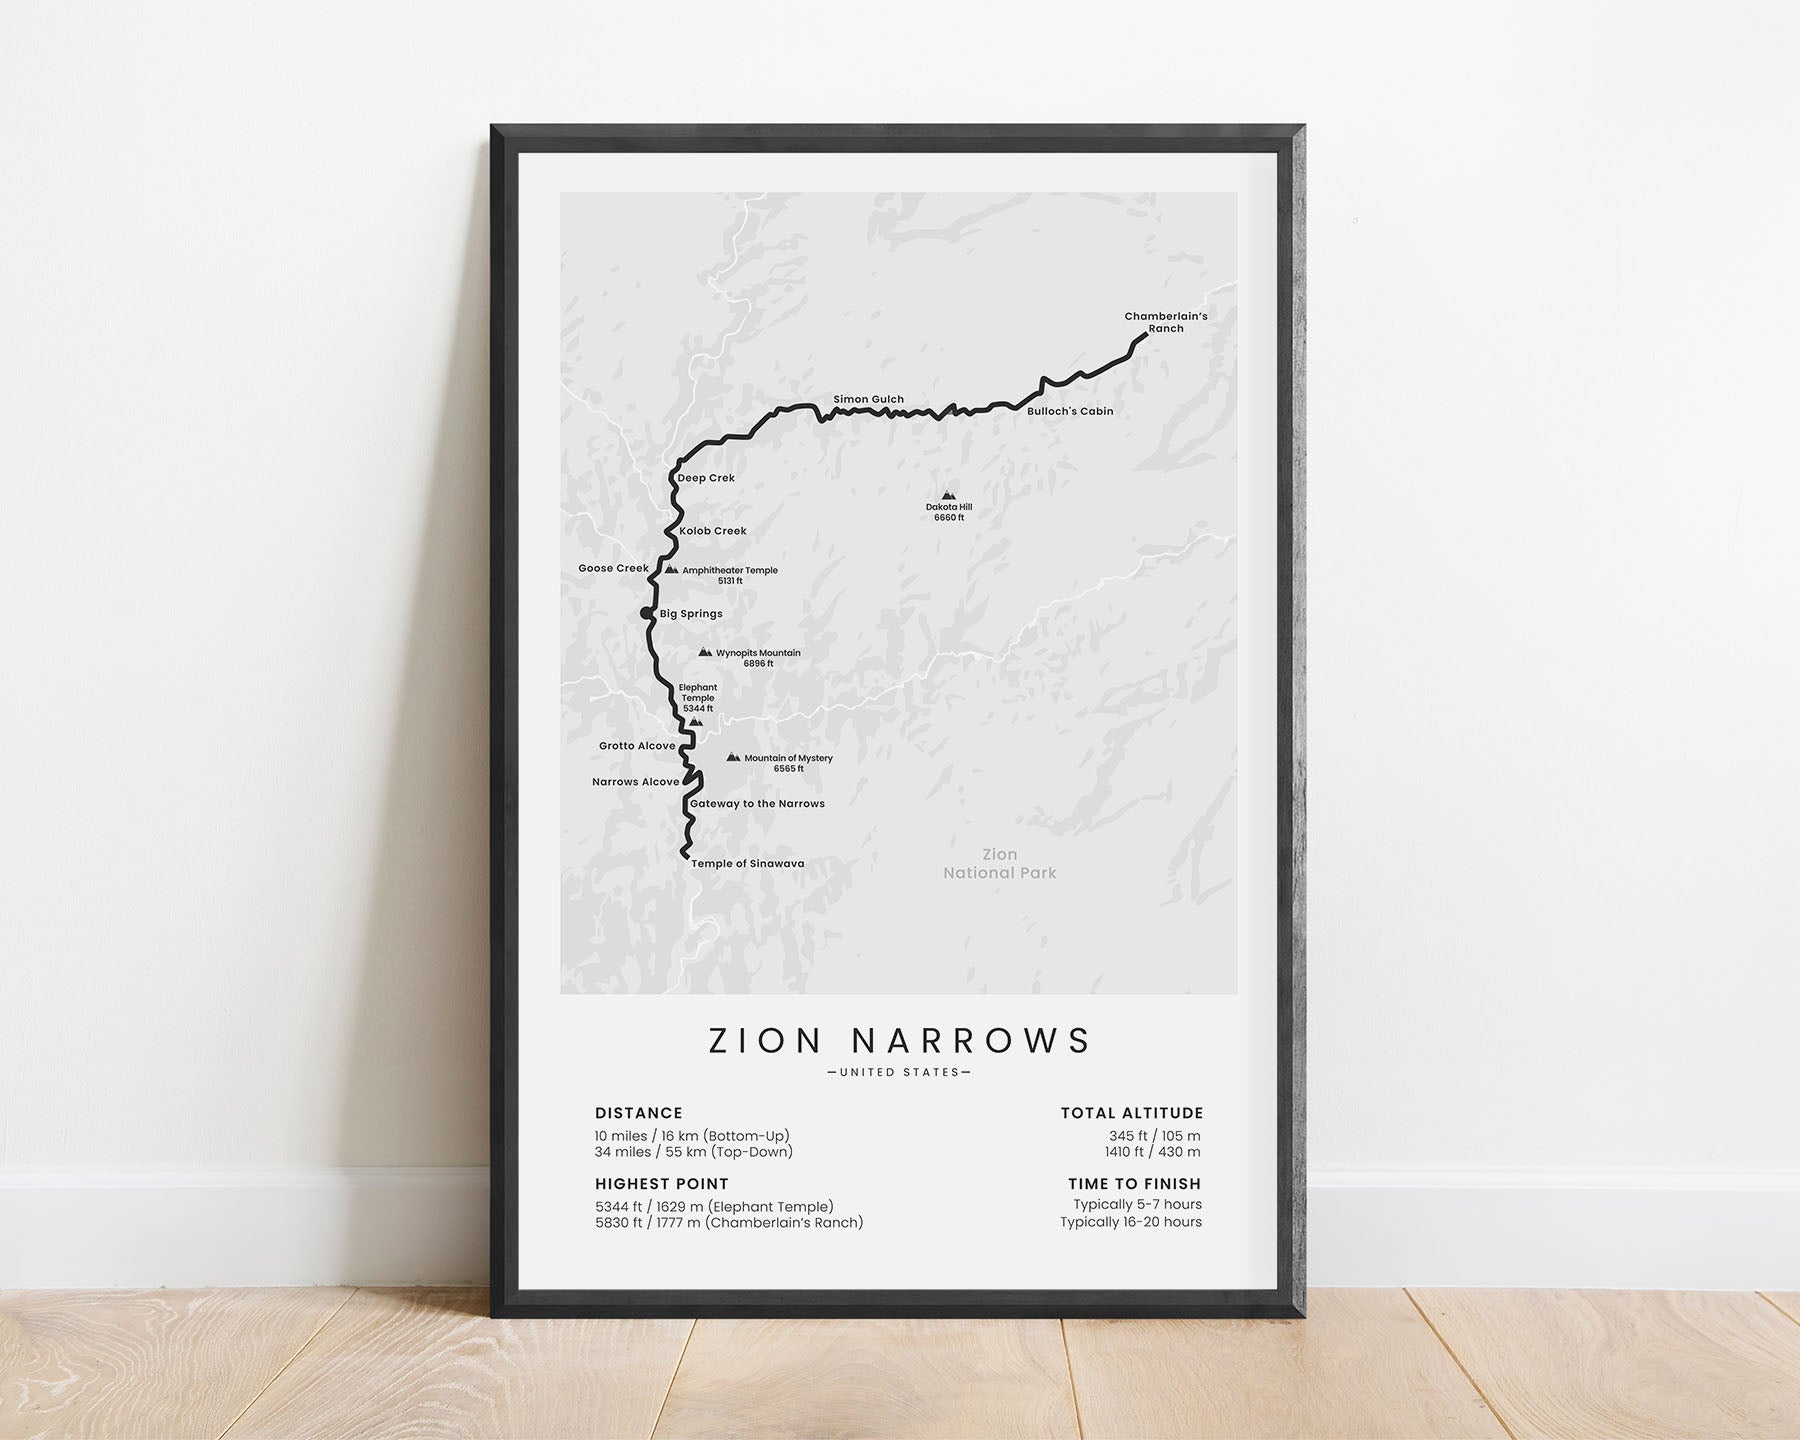 The Narrows (Zion National Park) trek wall map with white background